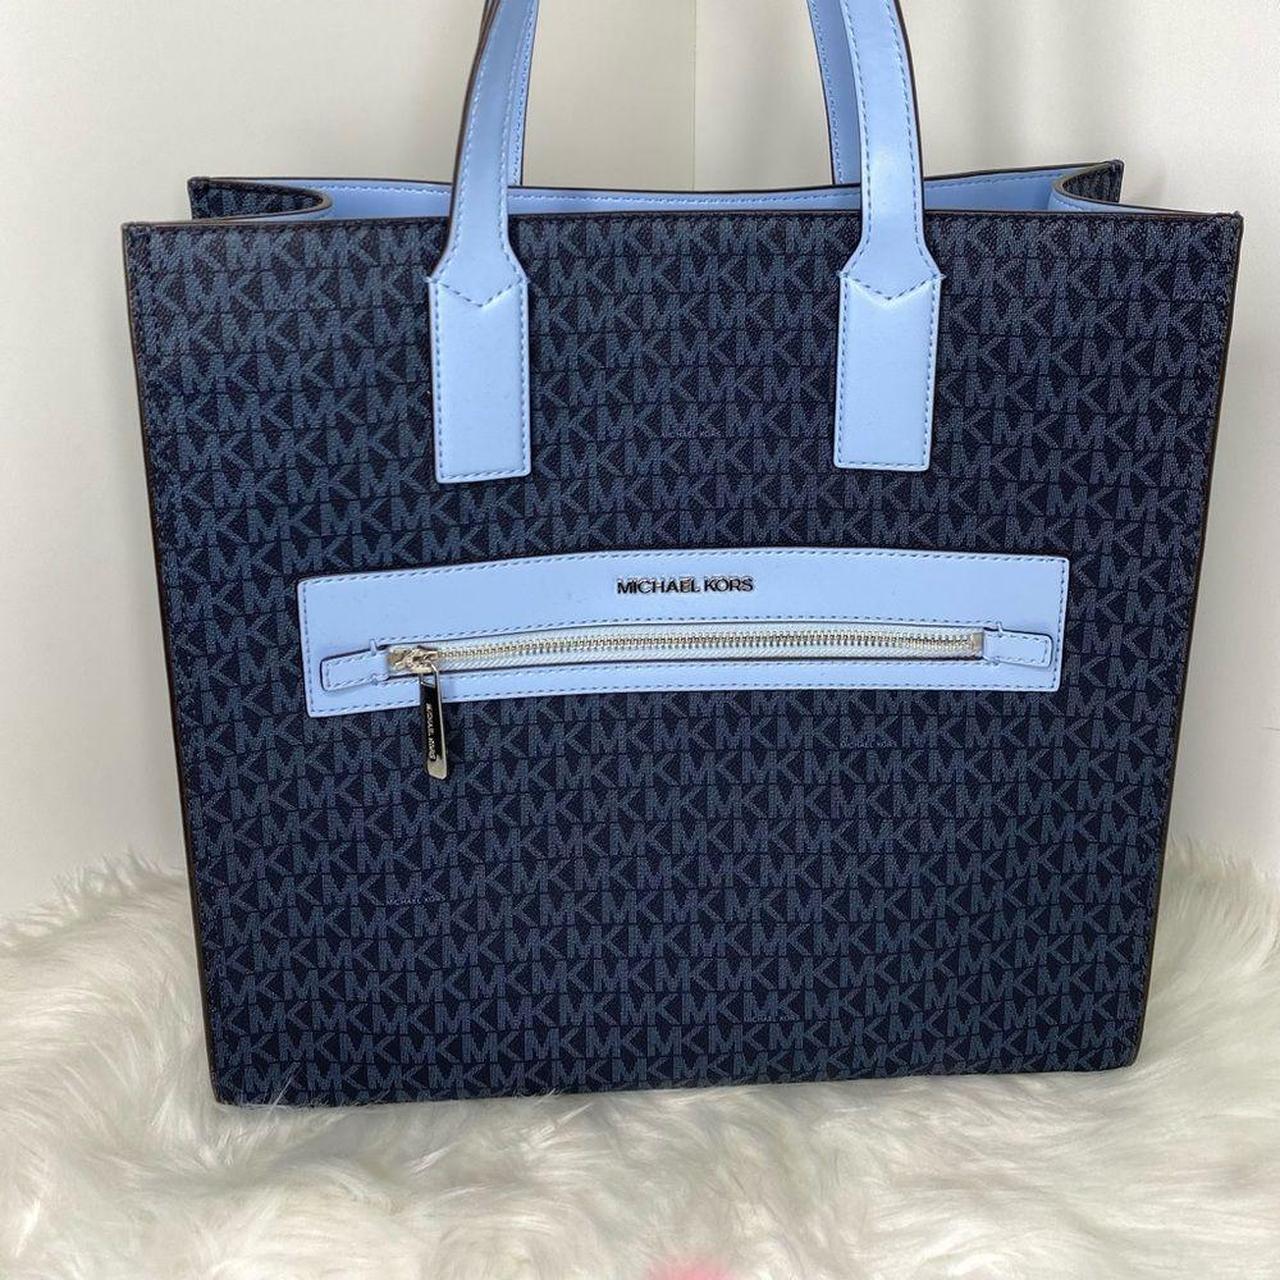 Michael Kors Kenly Tote And Wallet for Sale in Townsend, MA